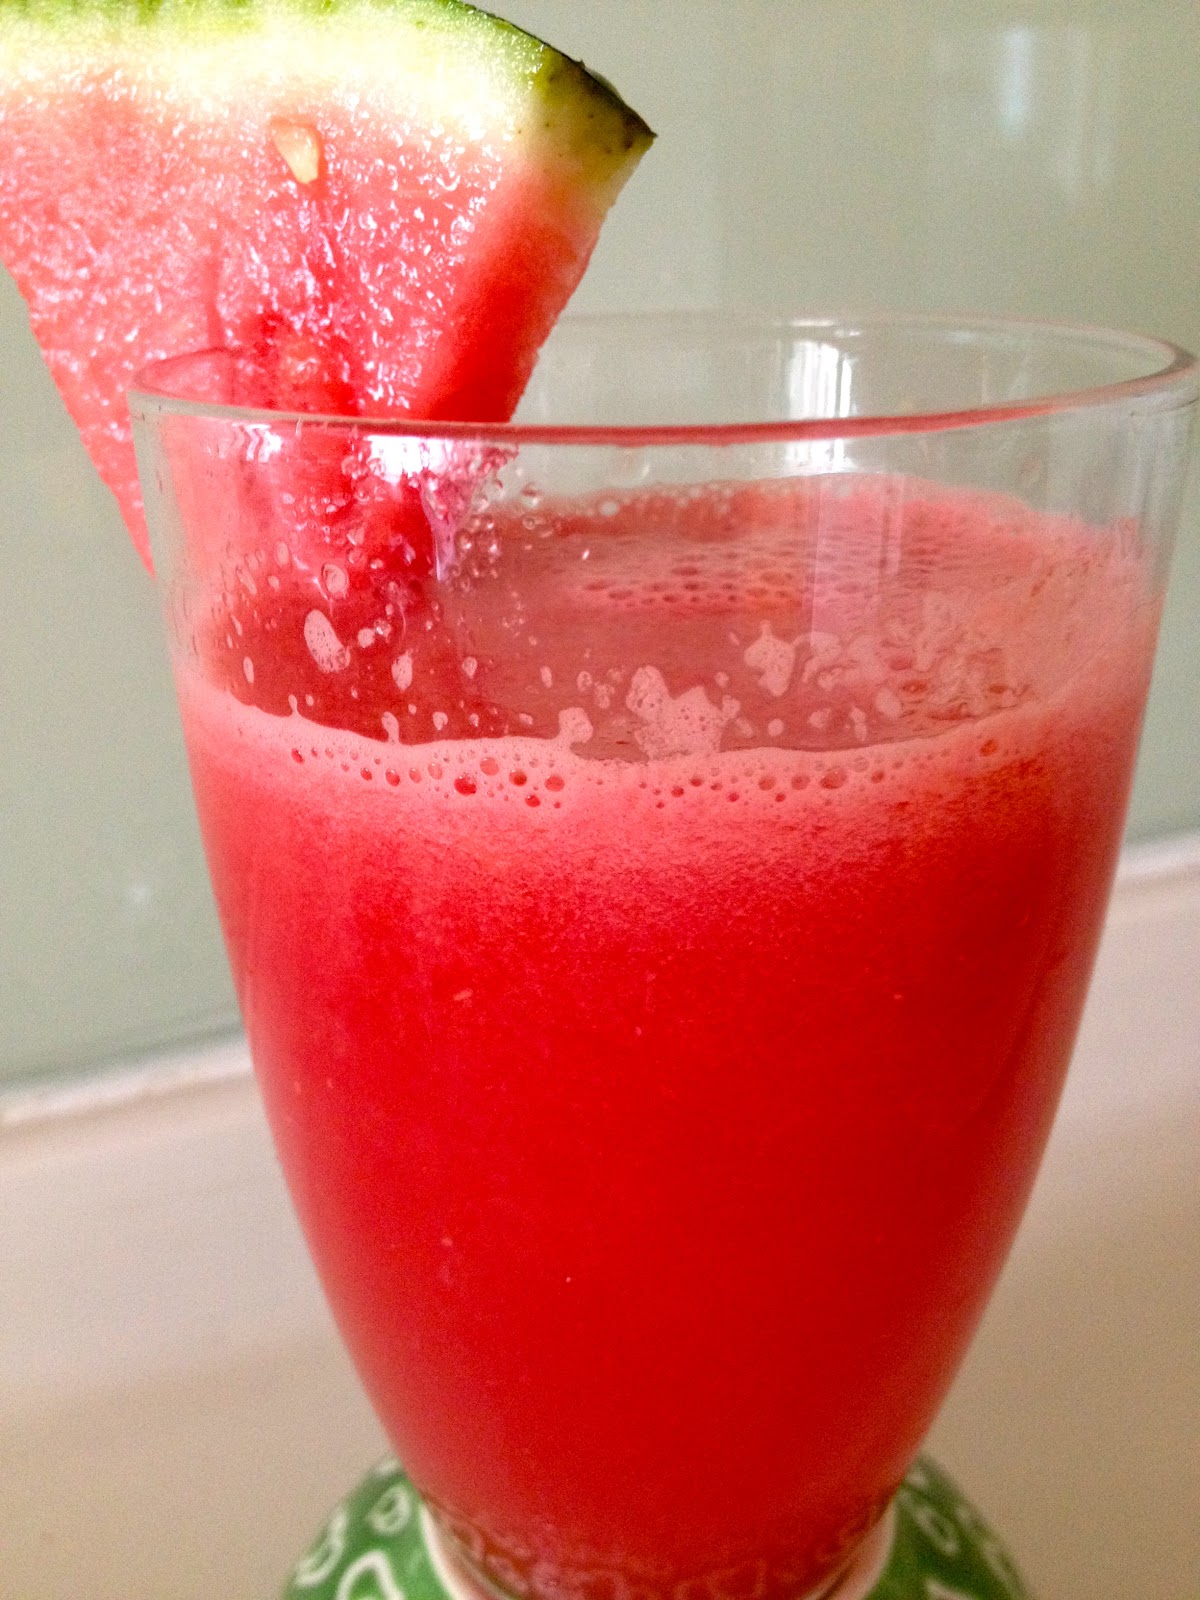 Simple Recipe To Make Watermelon Juice At Home Recipe Typical Of Padang City